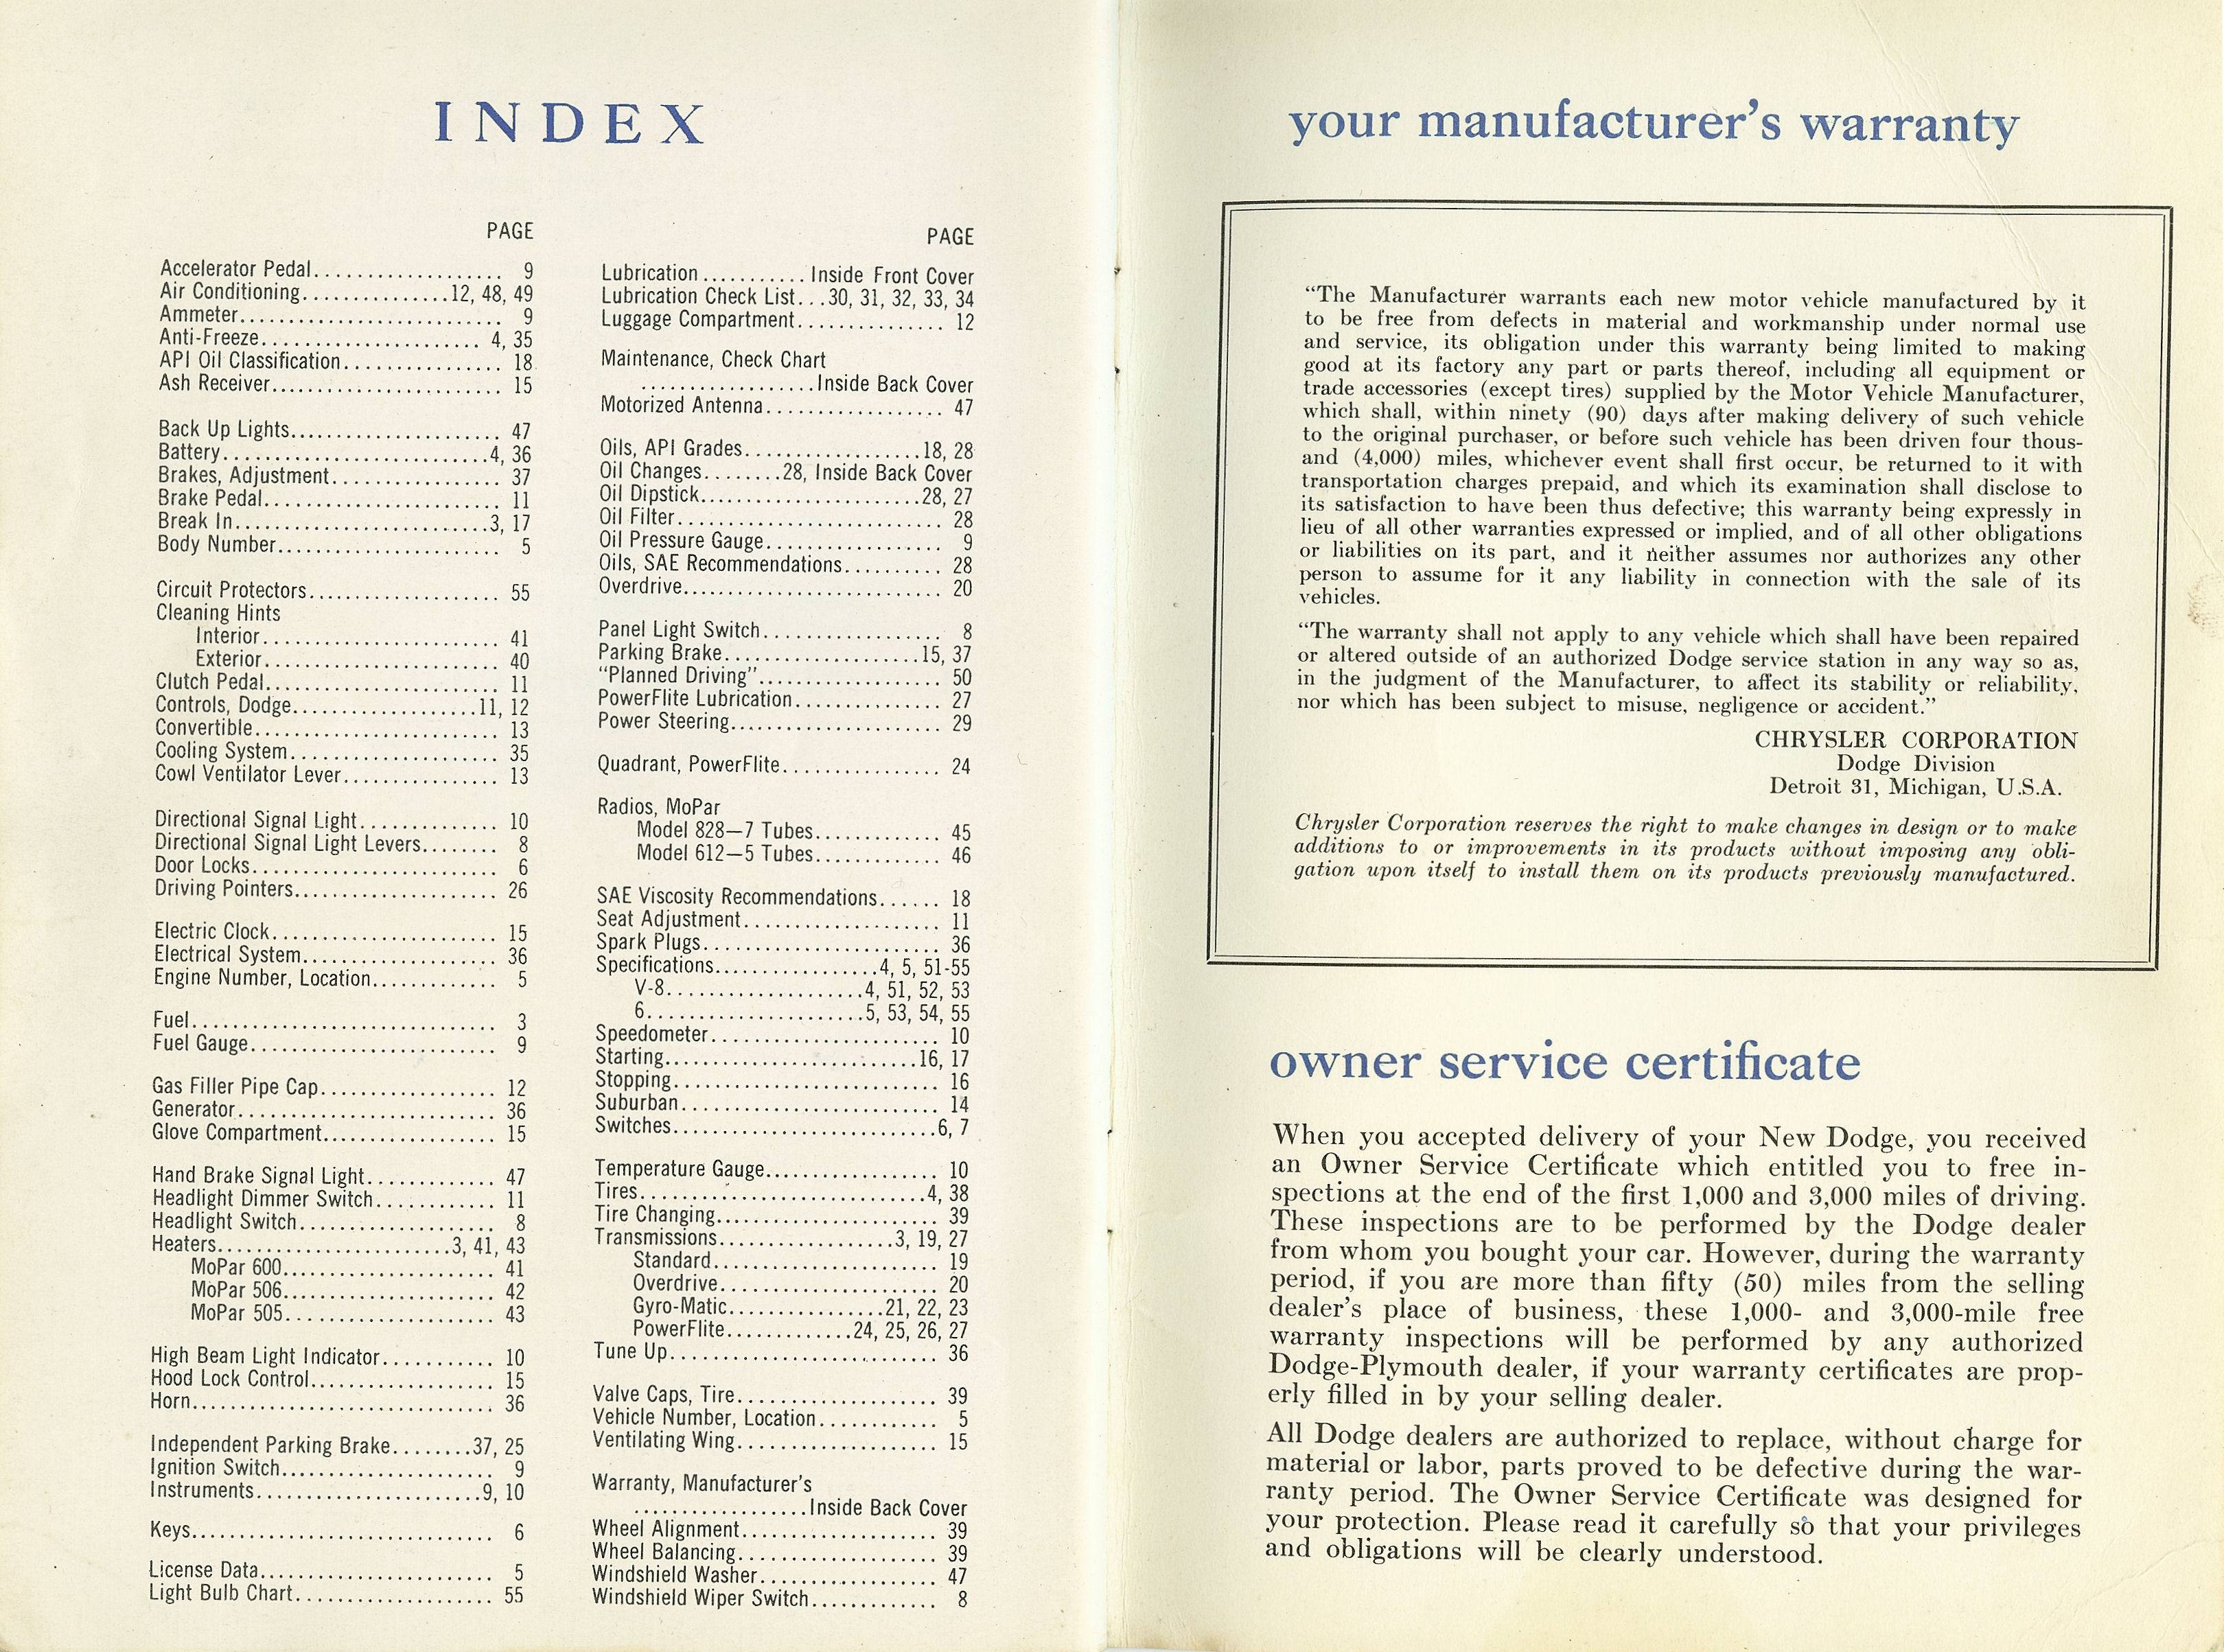 1954 Dodge Car Owners Manual Page 22